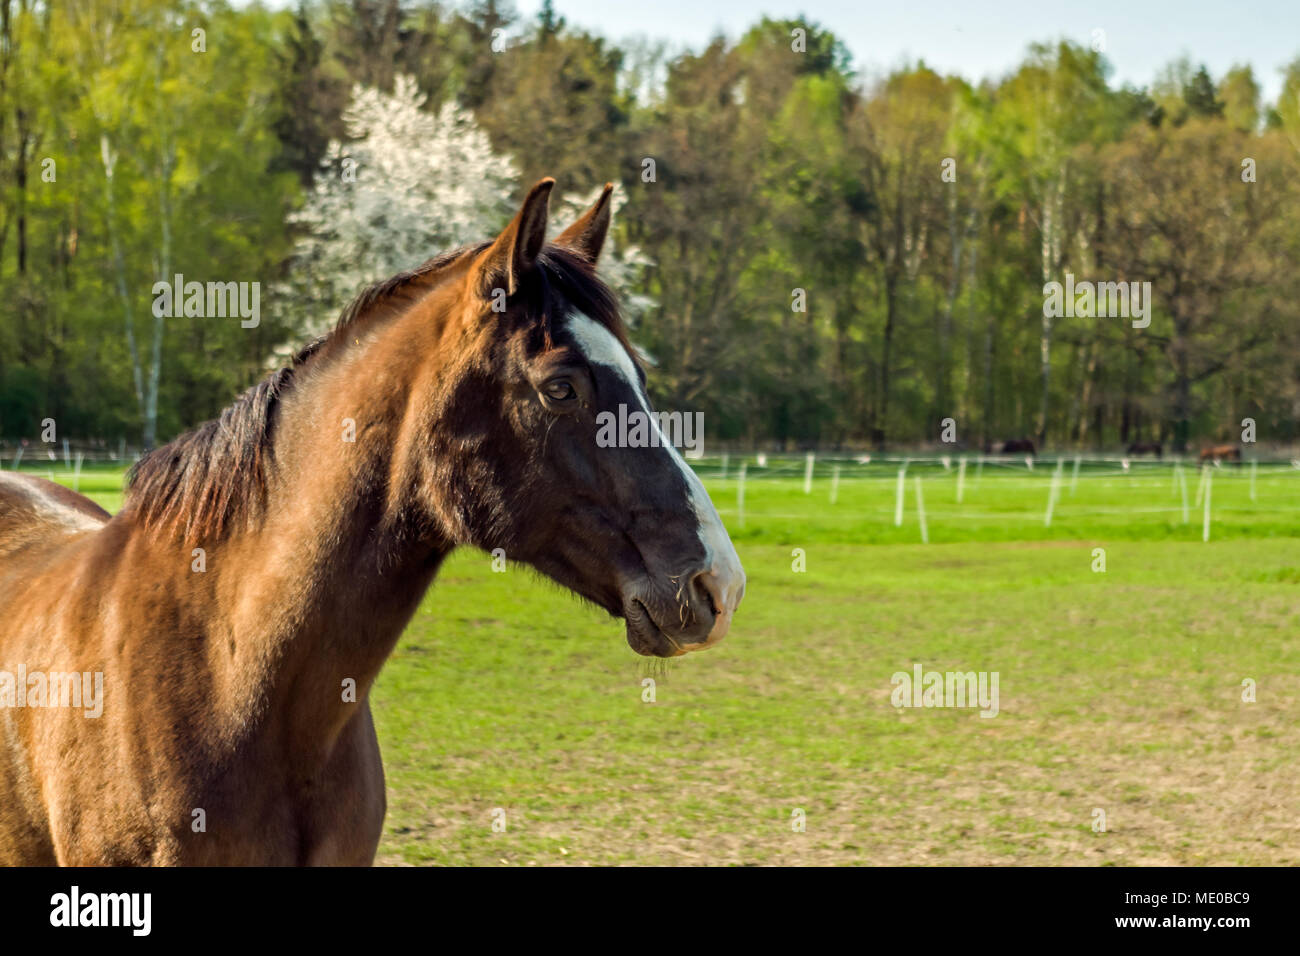 Young chestnut mare horse with white patch on its forehead the pasture observes the surroundings. Public ground in Zabrze, Silesian Upland, Poland. Stock Photo